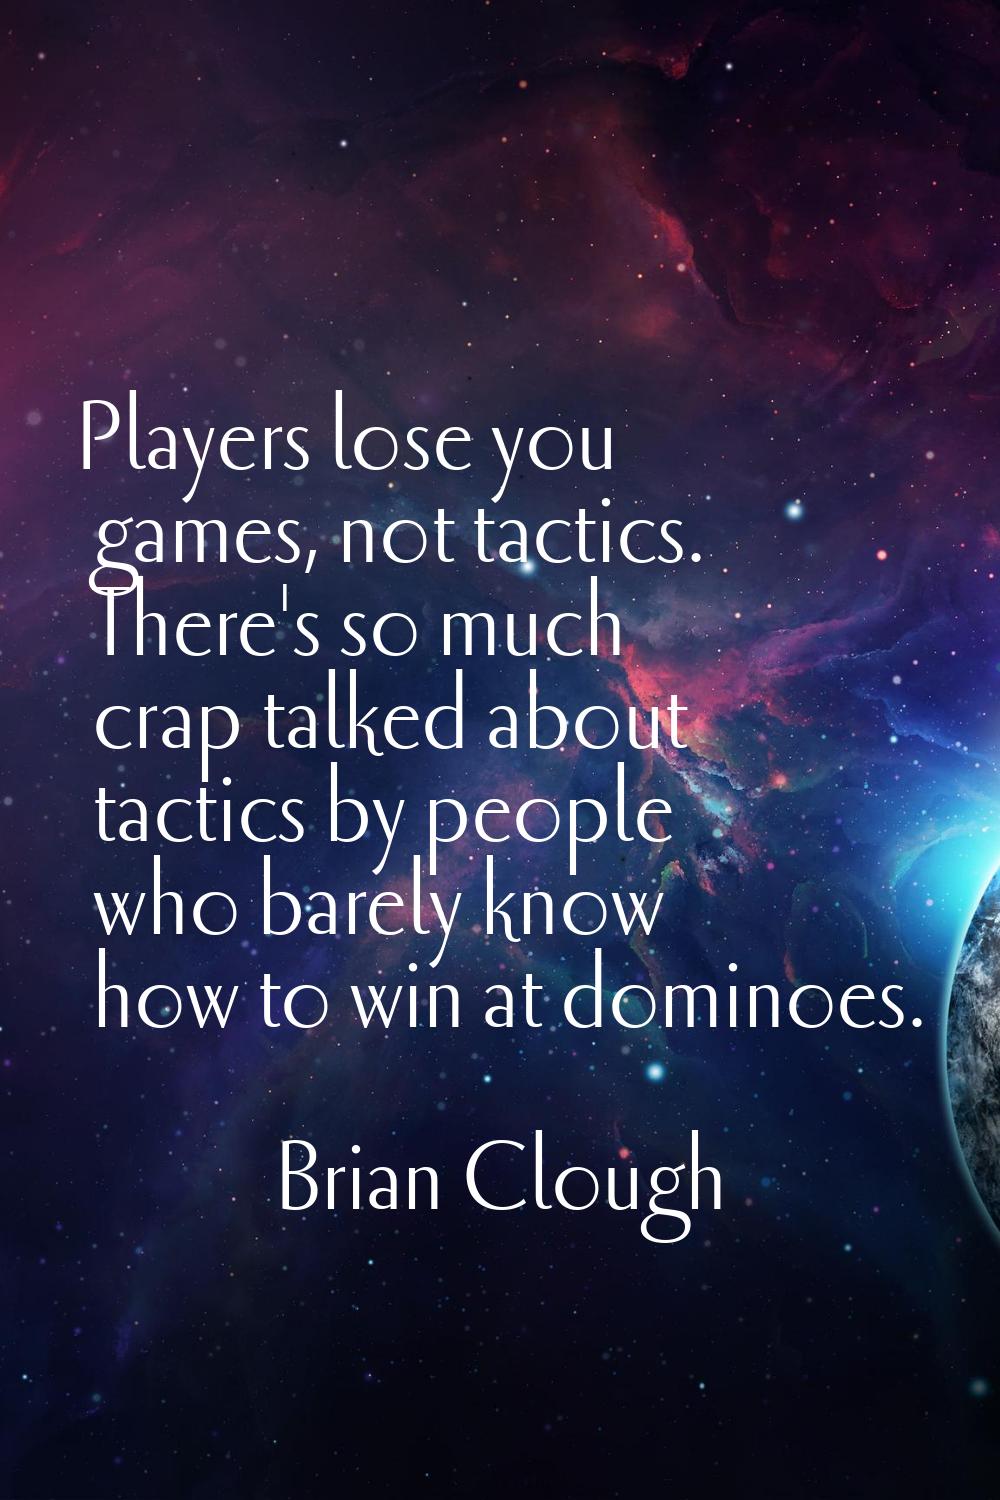 Players lose you games, not tactics. There's so much crap talked about tactics by people who barely